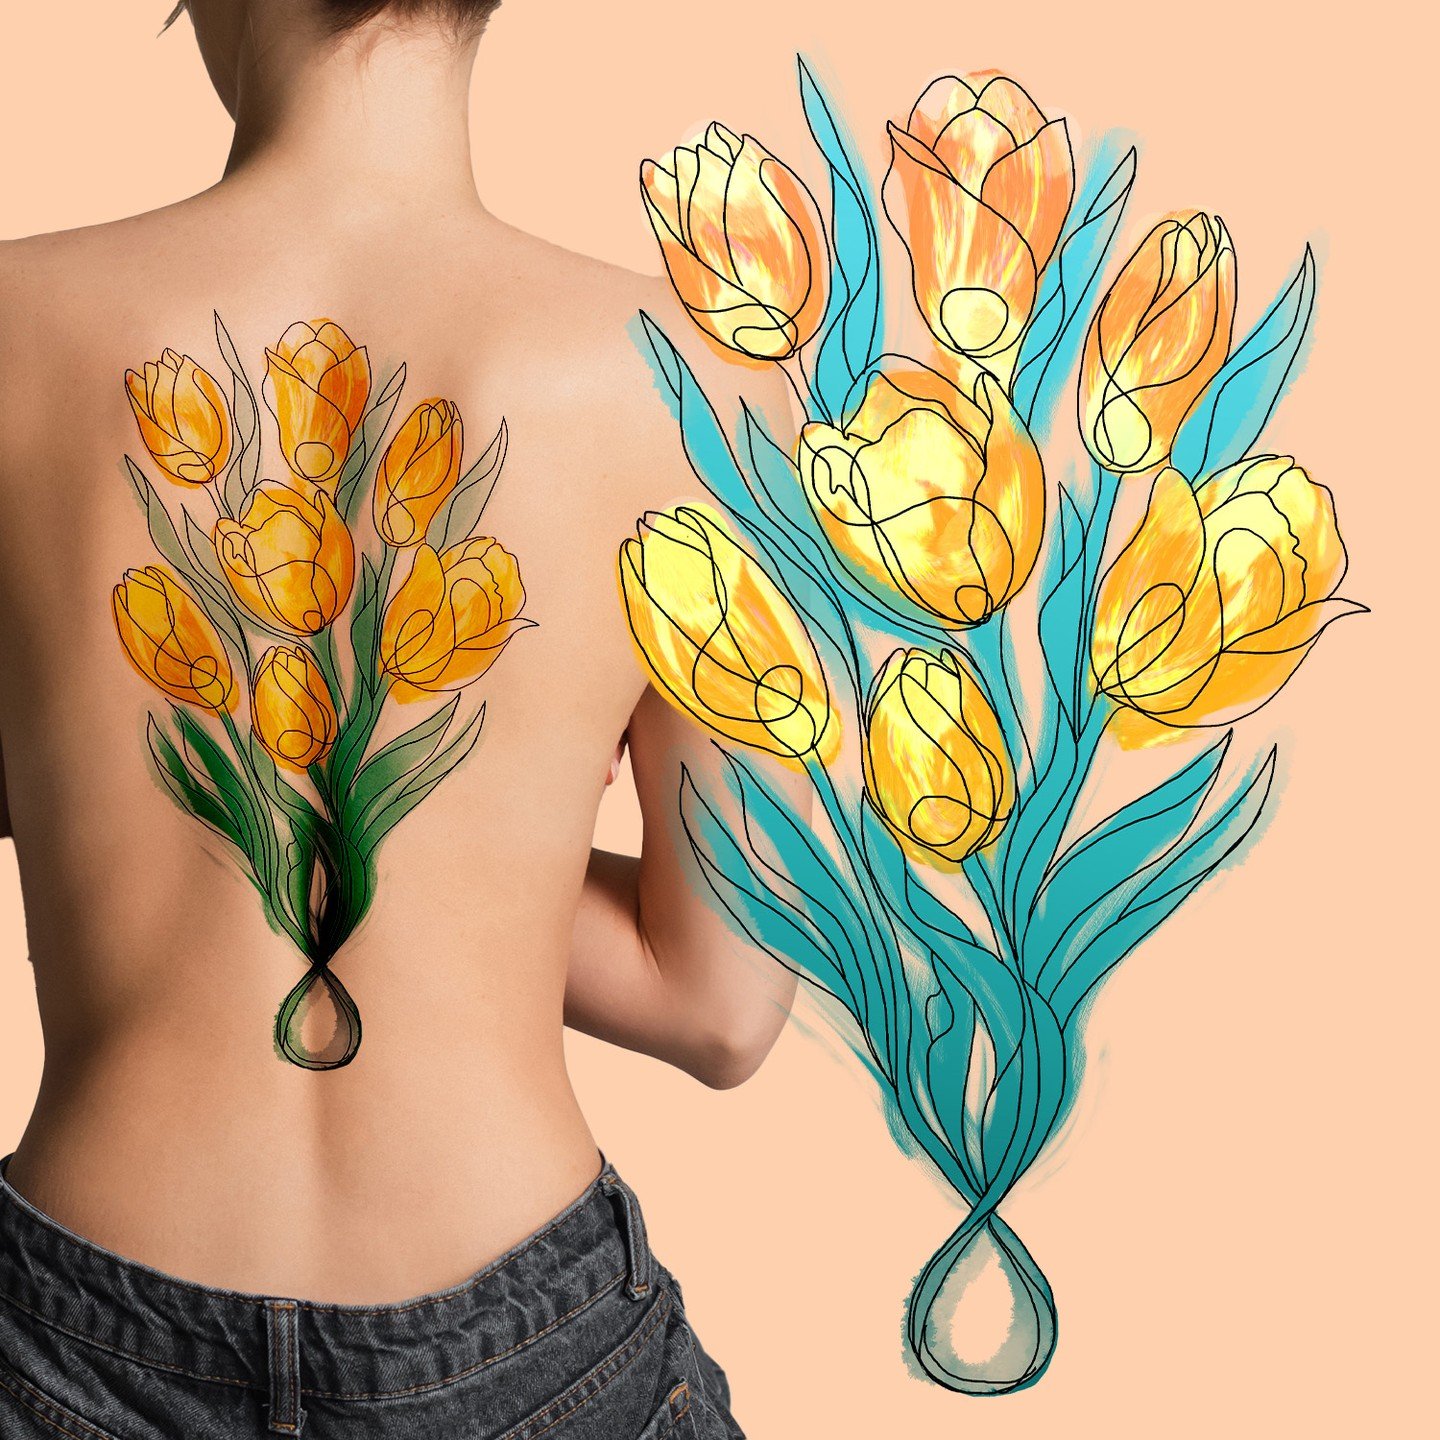 Tattoo design (and mockup) for @jeyprnssa, featuring tulips&ndash;a symbol of resilience in the midst a harsh environment. I included seven blooms to symbolize fulfillment. Intentionally drew the bottom part to look like the number eight to signify n